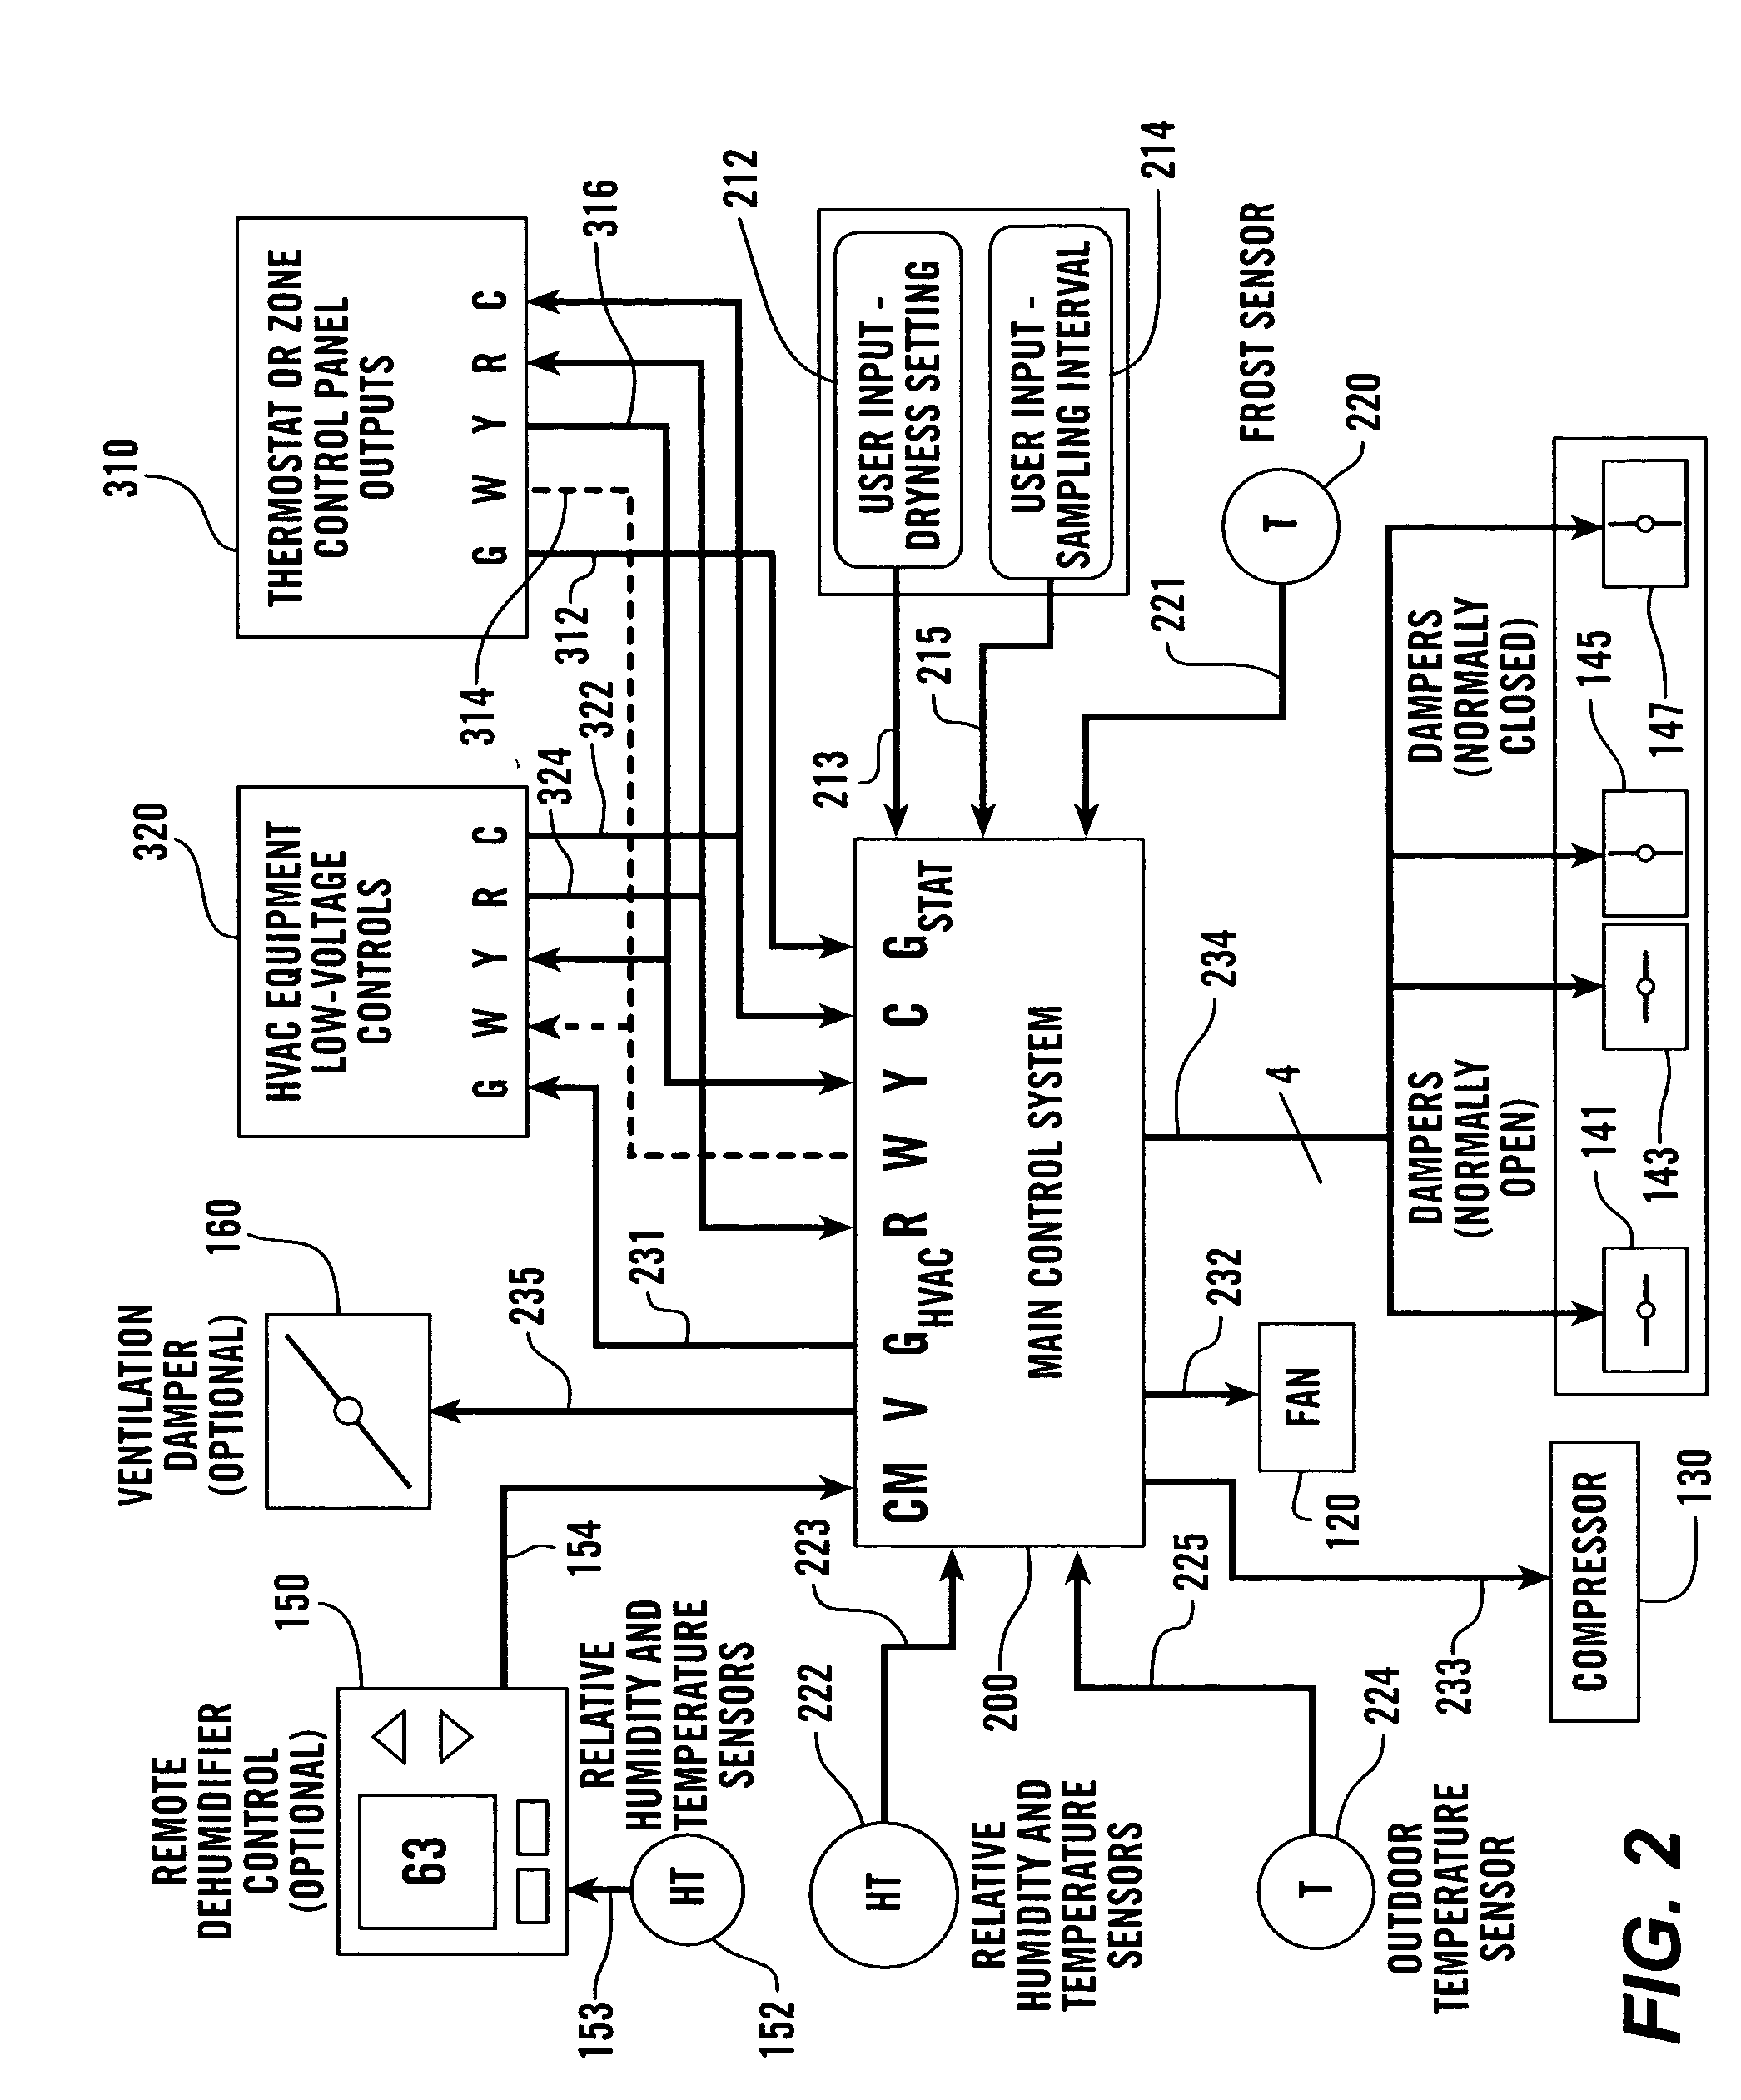 Systems and methods for whole-house dehumidification based on dew point measurements